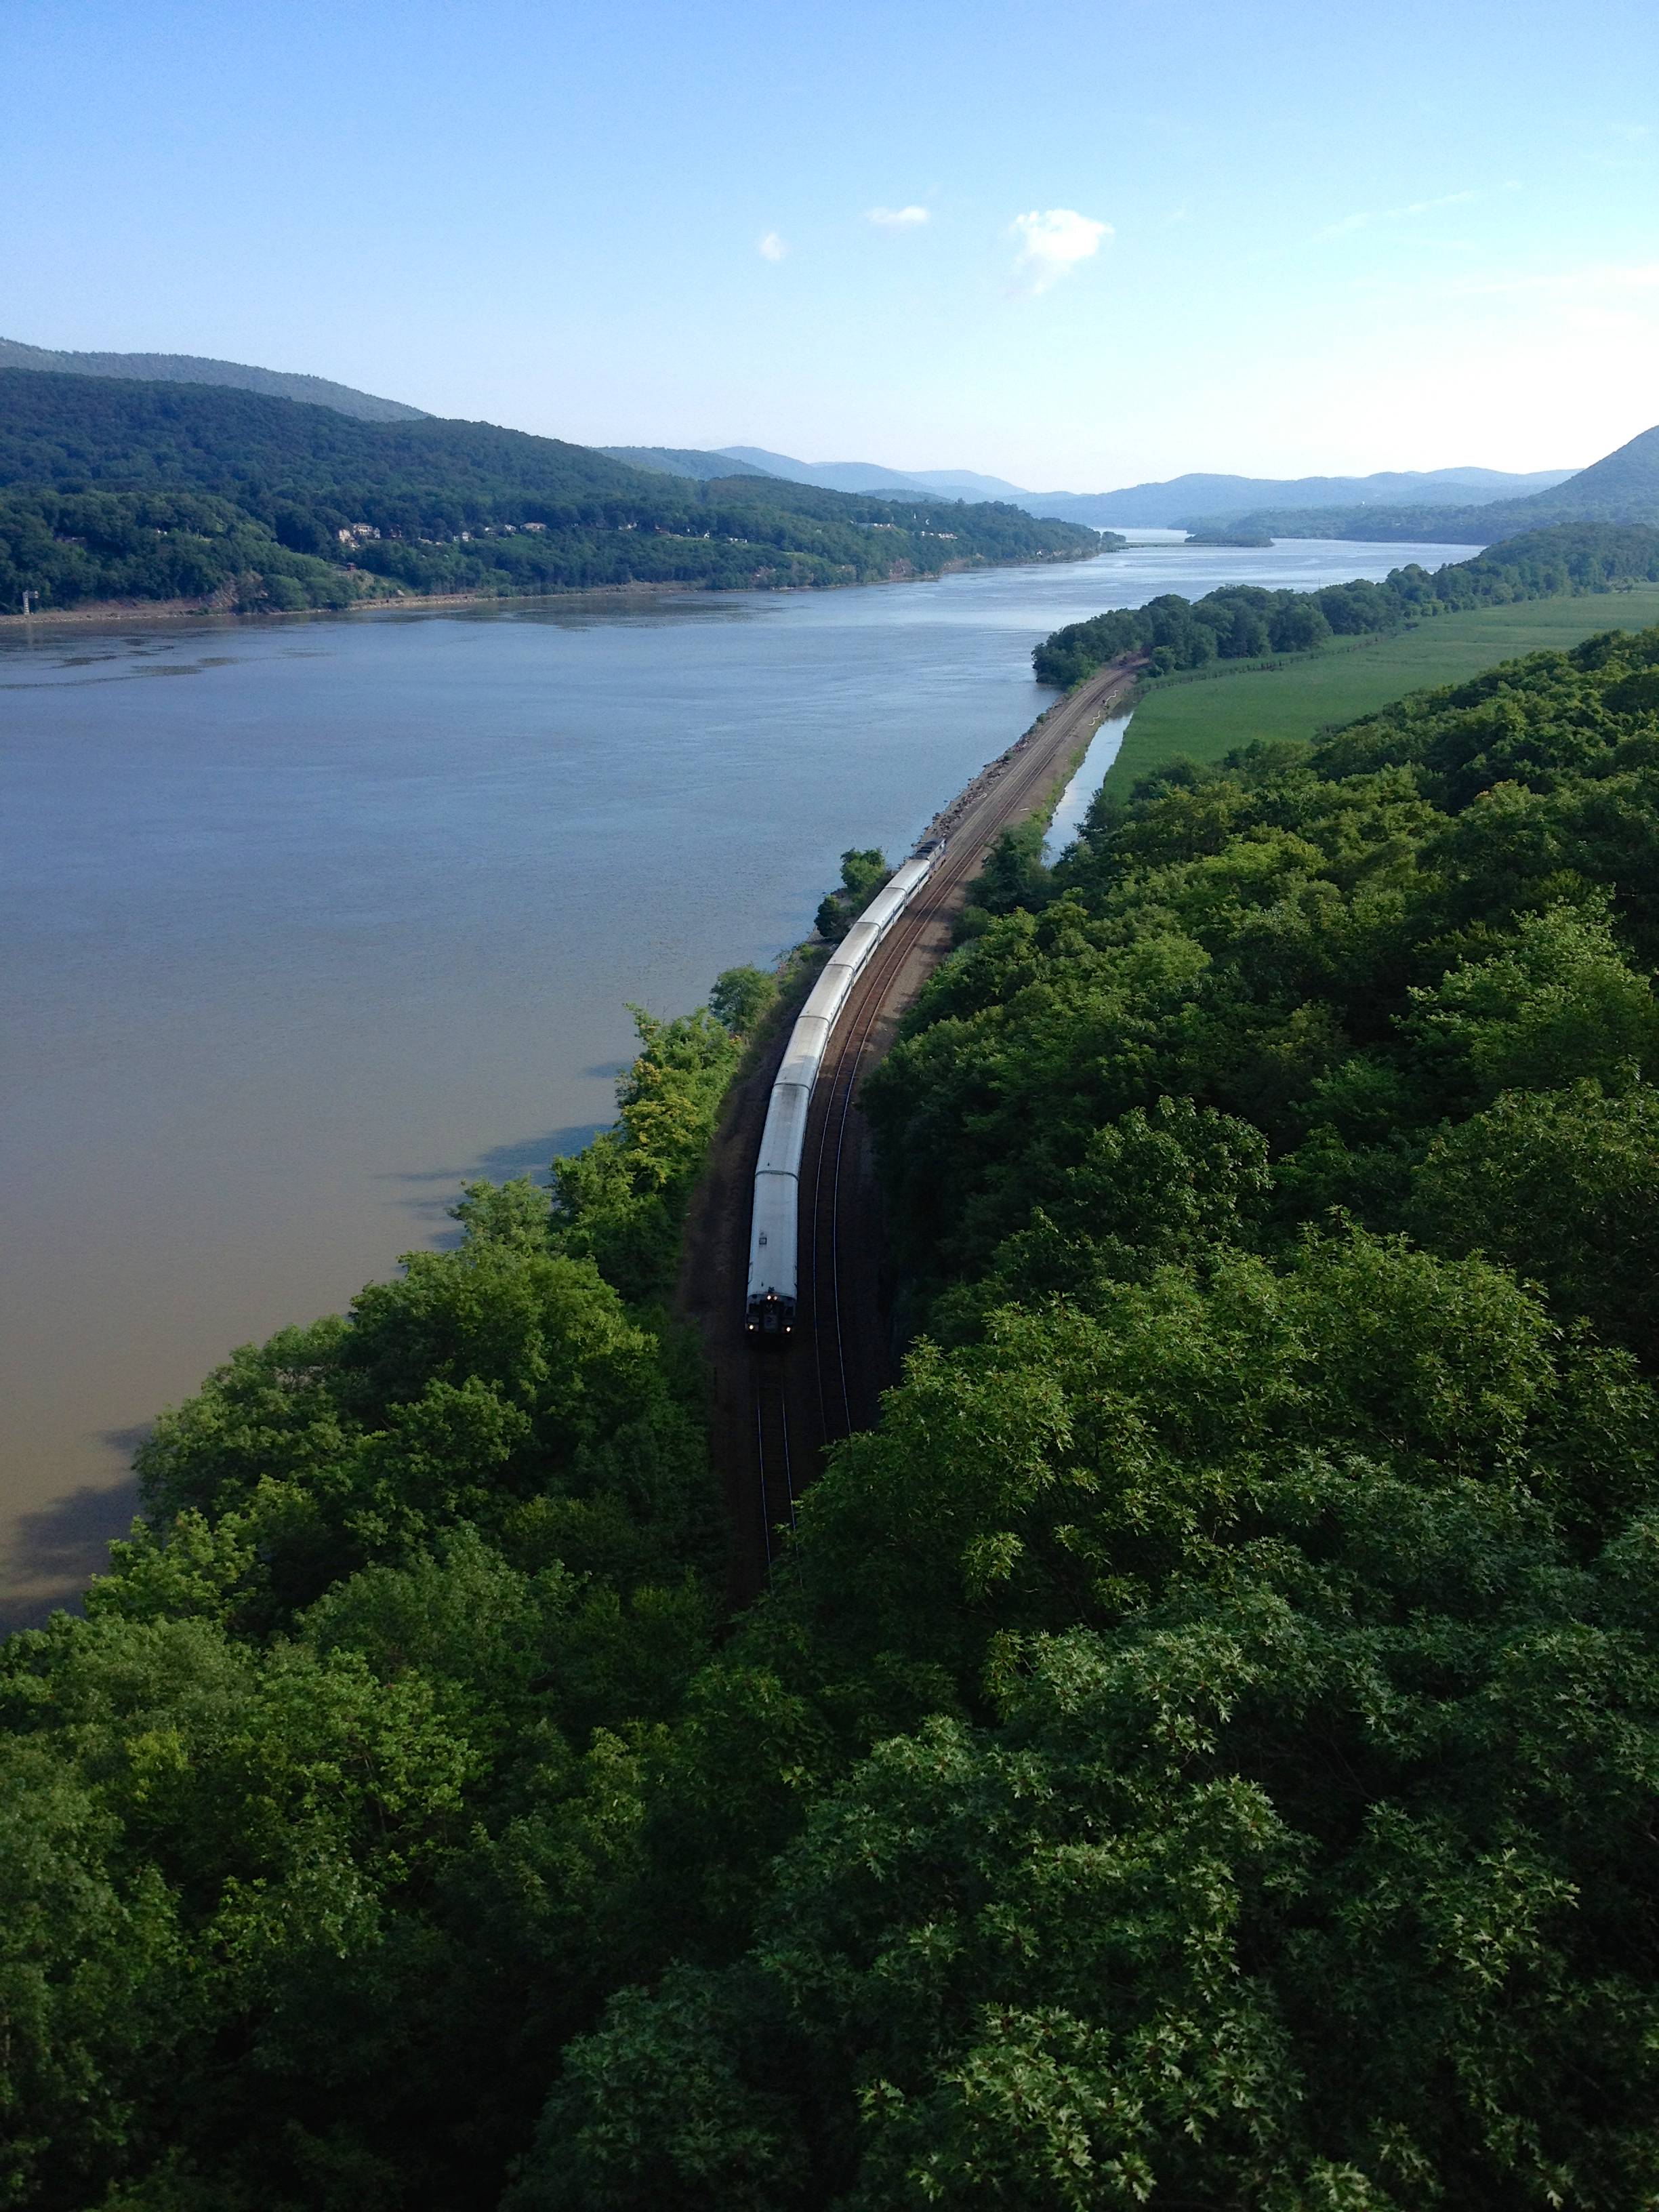 A look down from the Hudson River Bridge in Bear Mountain, NY at the commuter train heading to New York City.